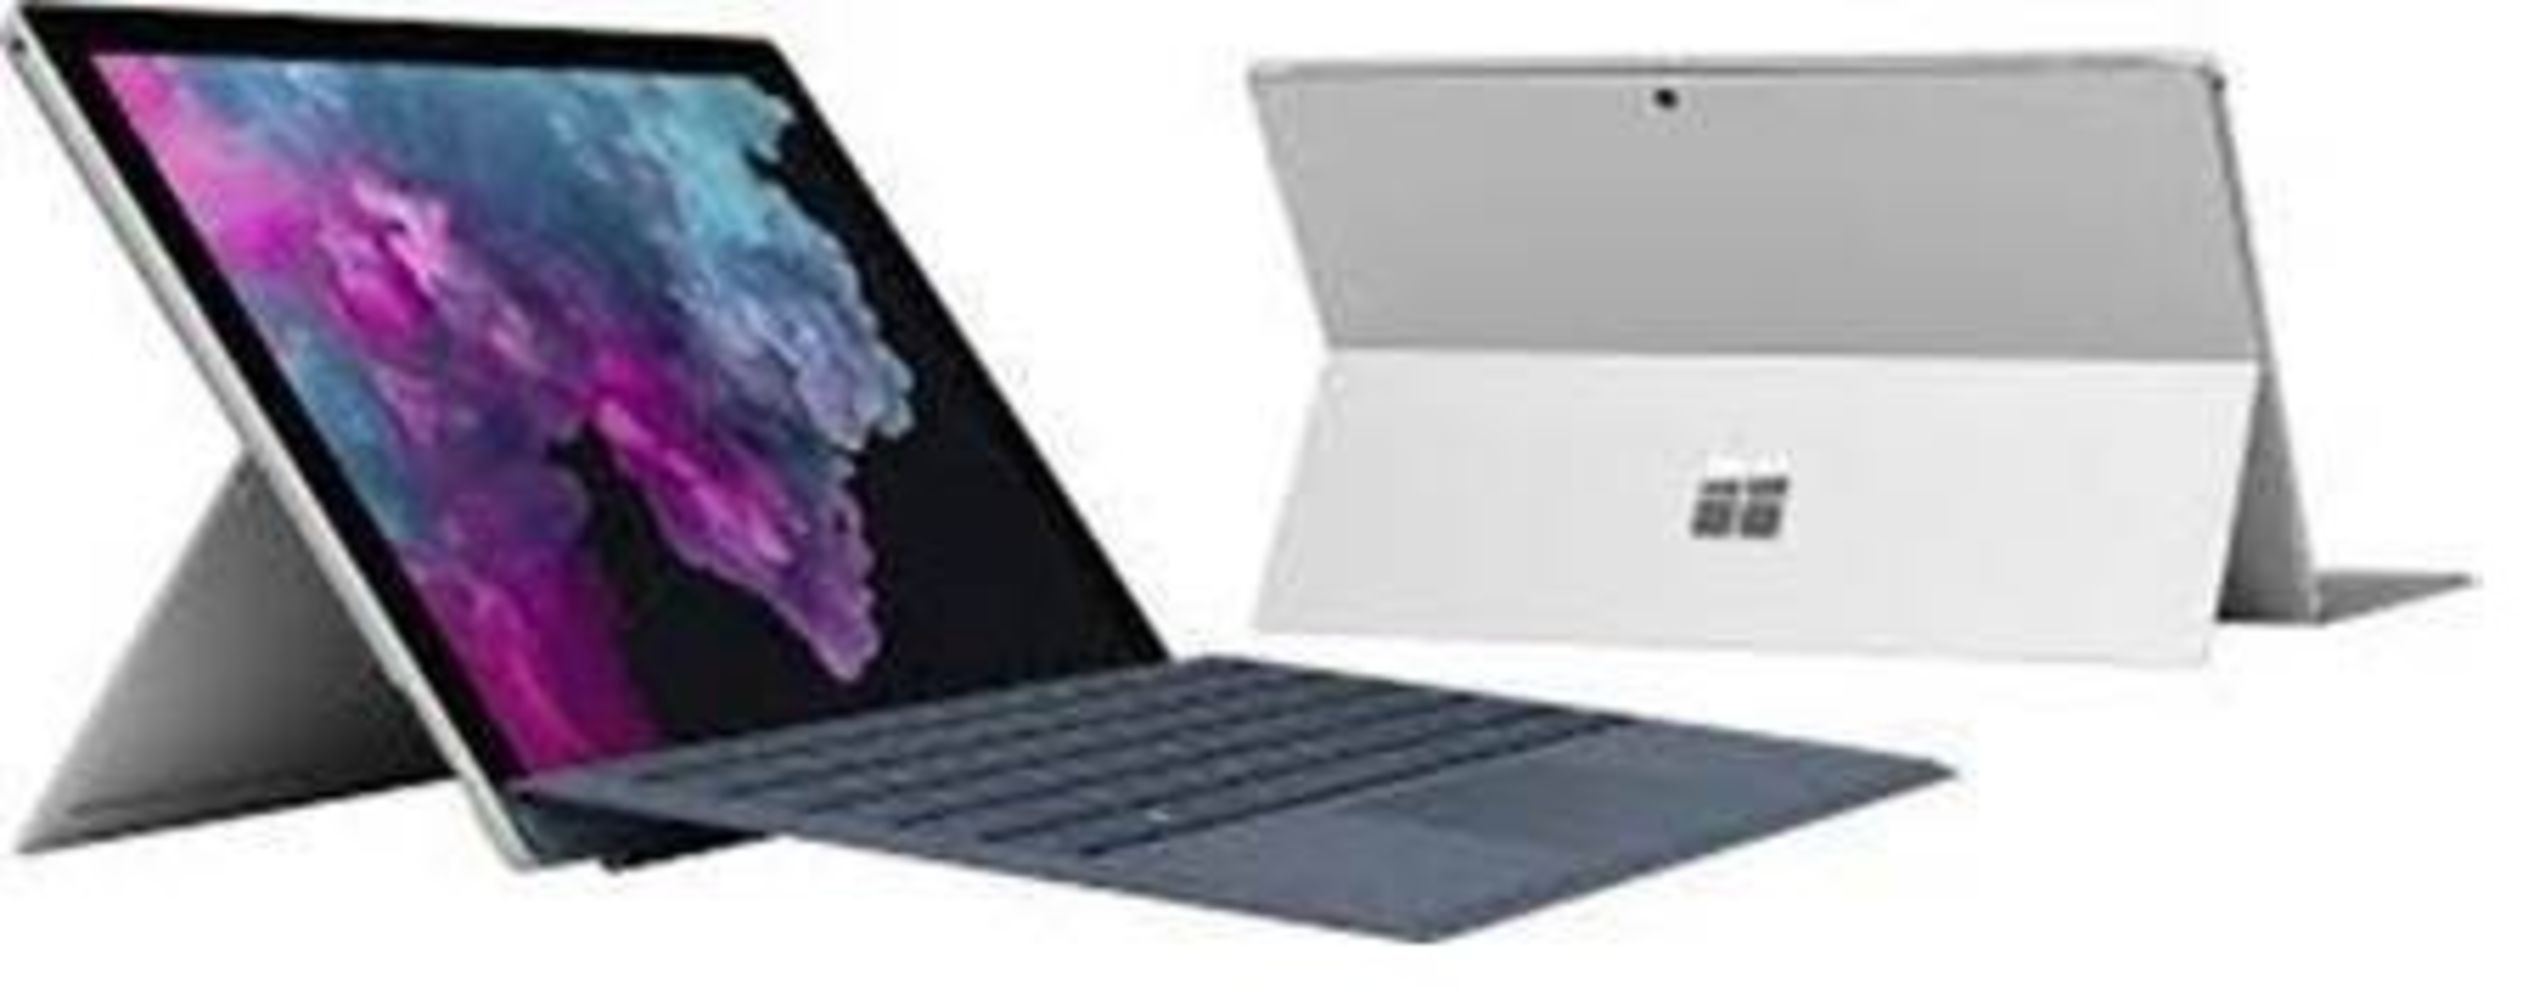 Microsoft Surface Pro 4, 5 and 6. Refurbished Grade A Dell Monitors and 70 x Apple iPads Trade Lots